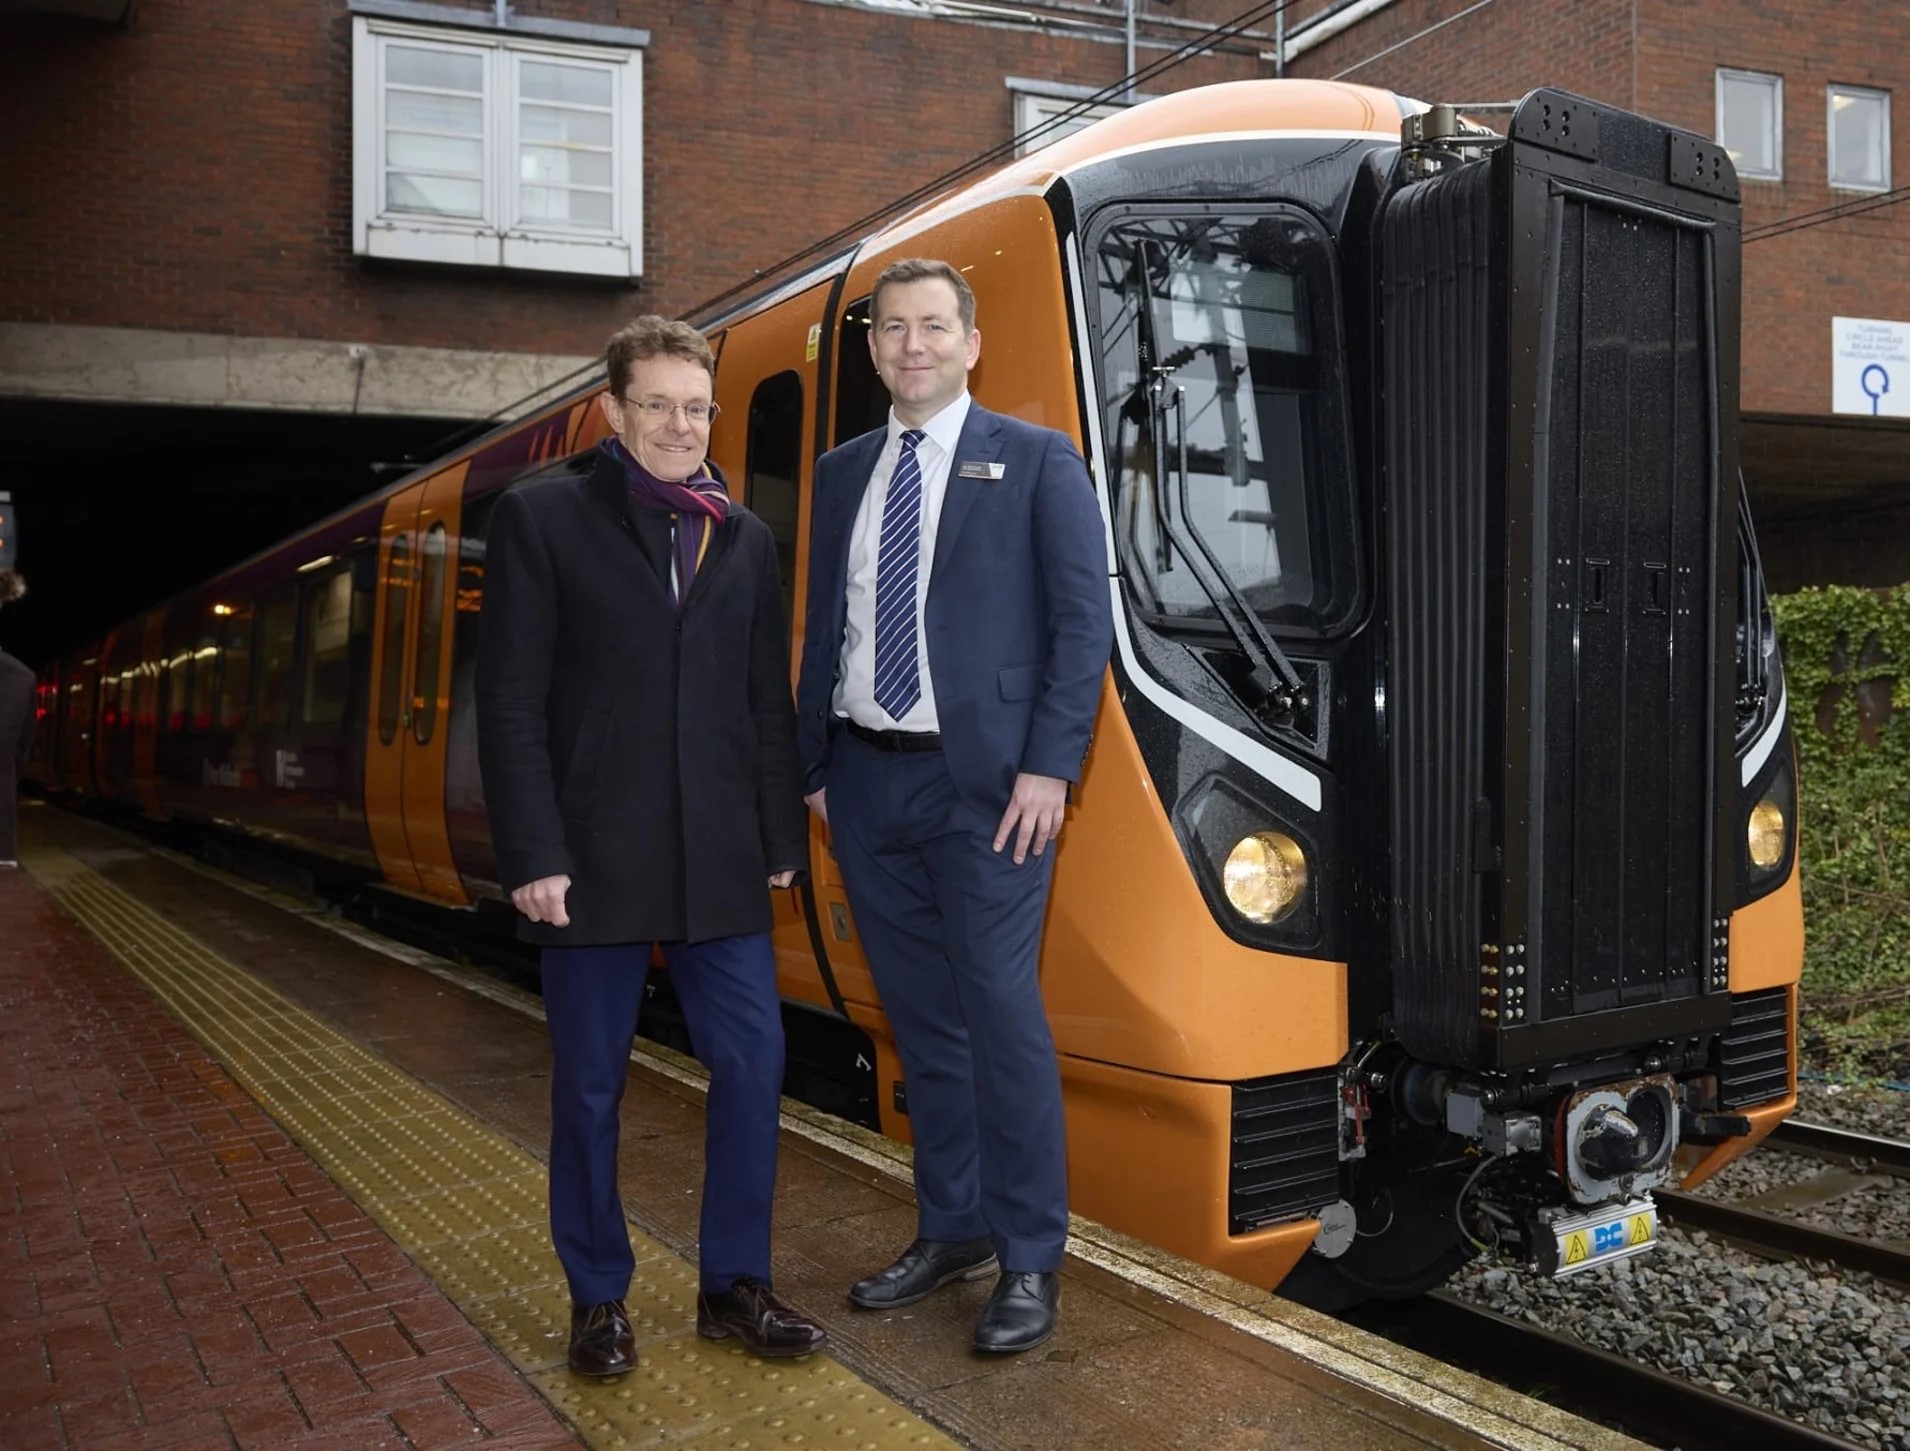 Mayor and West Midlands Railway managing director in front of one of the new class 730 trains